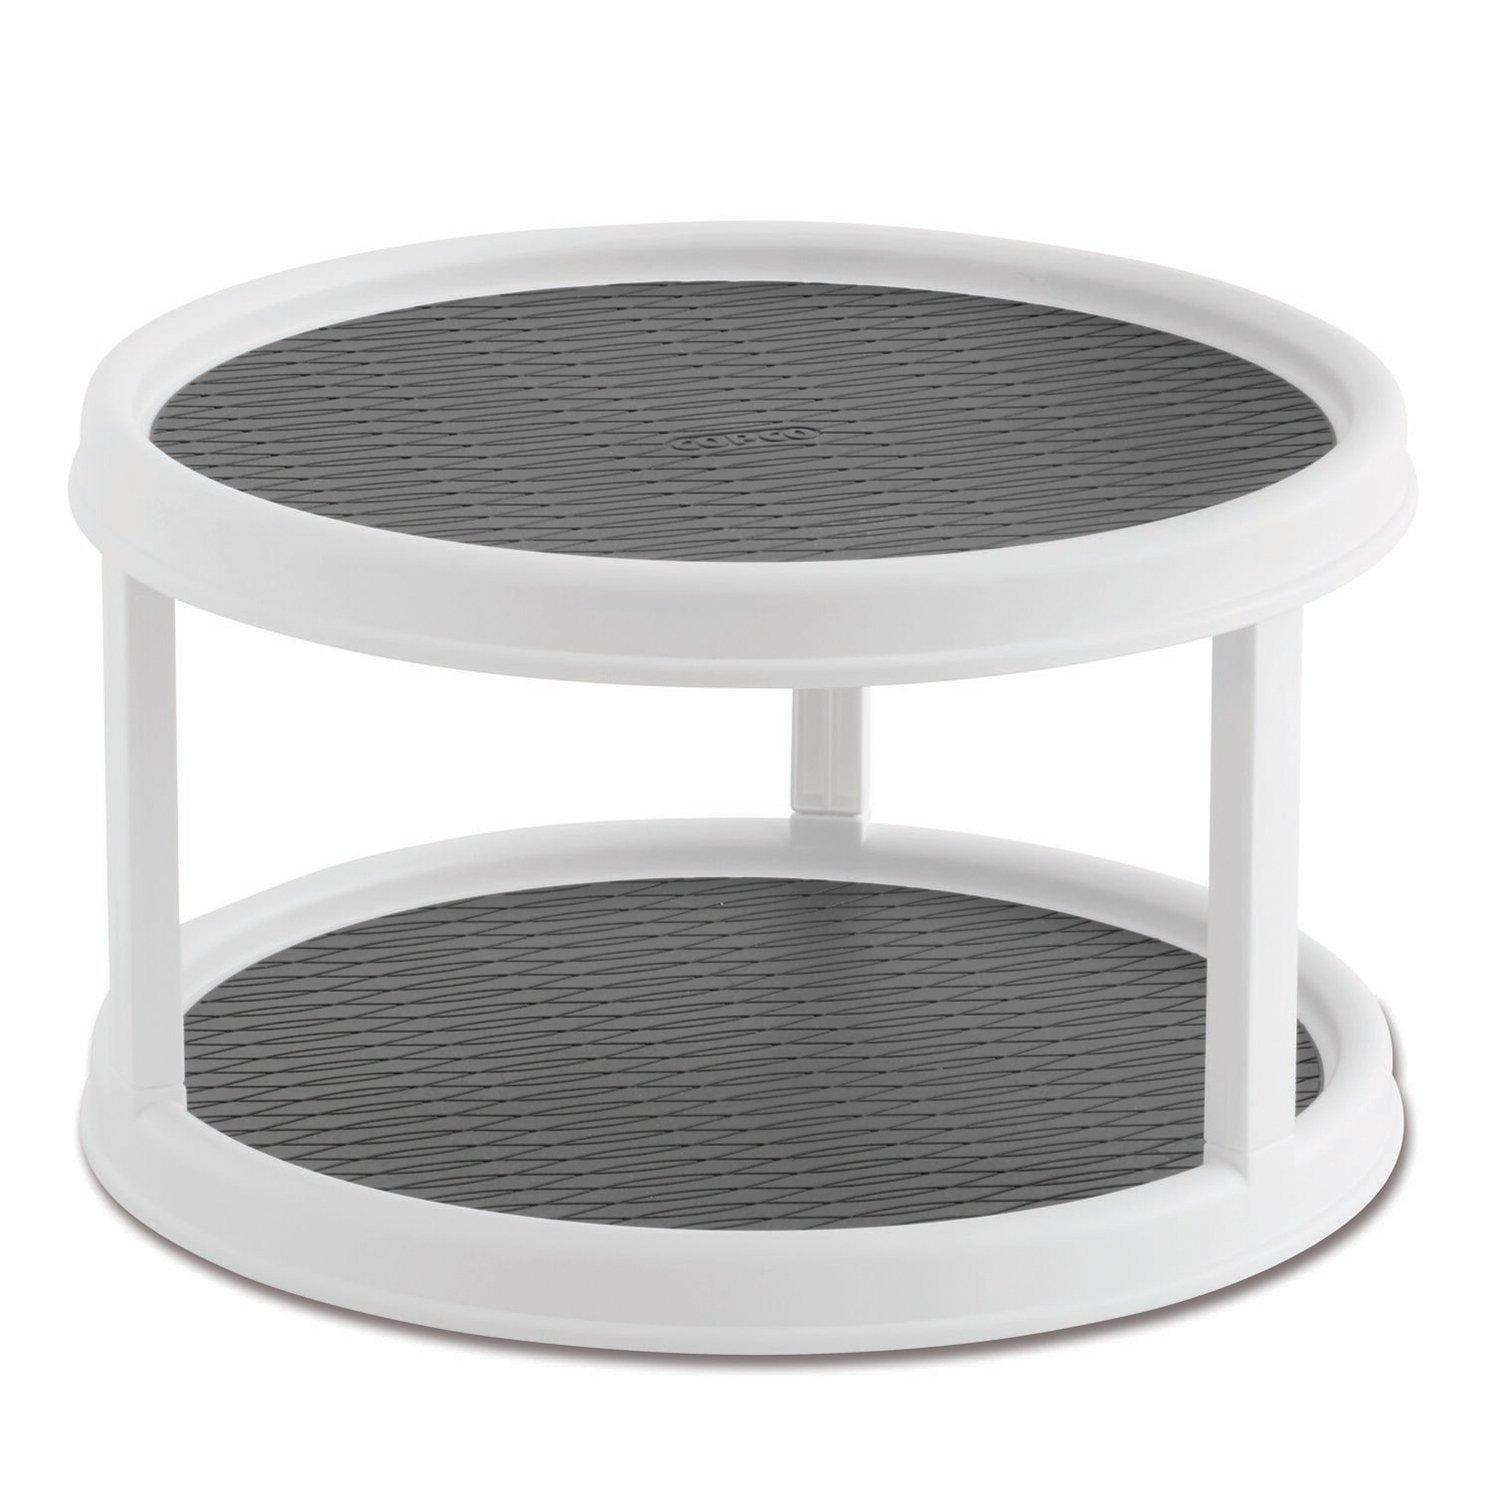 12in. 2 Tier Turntable